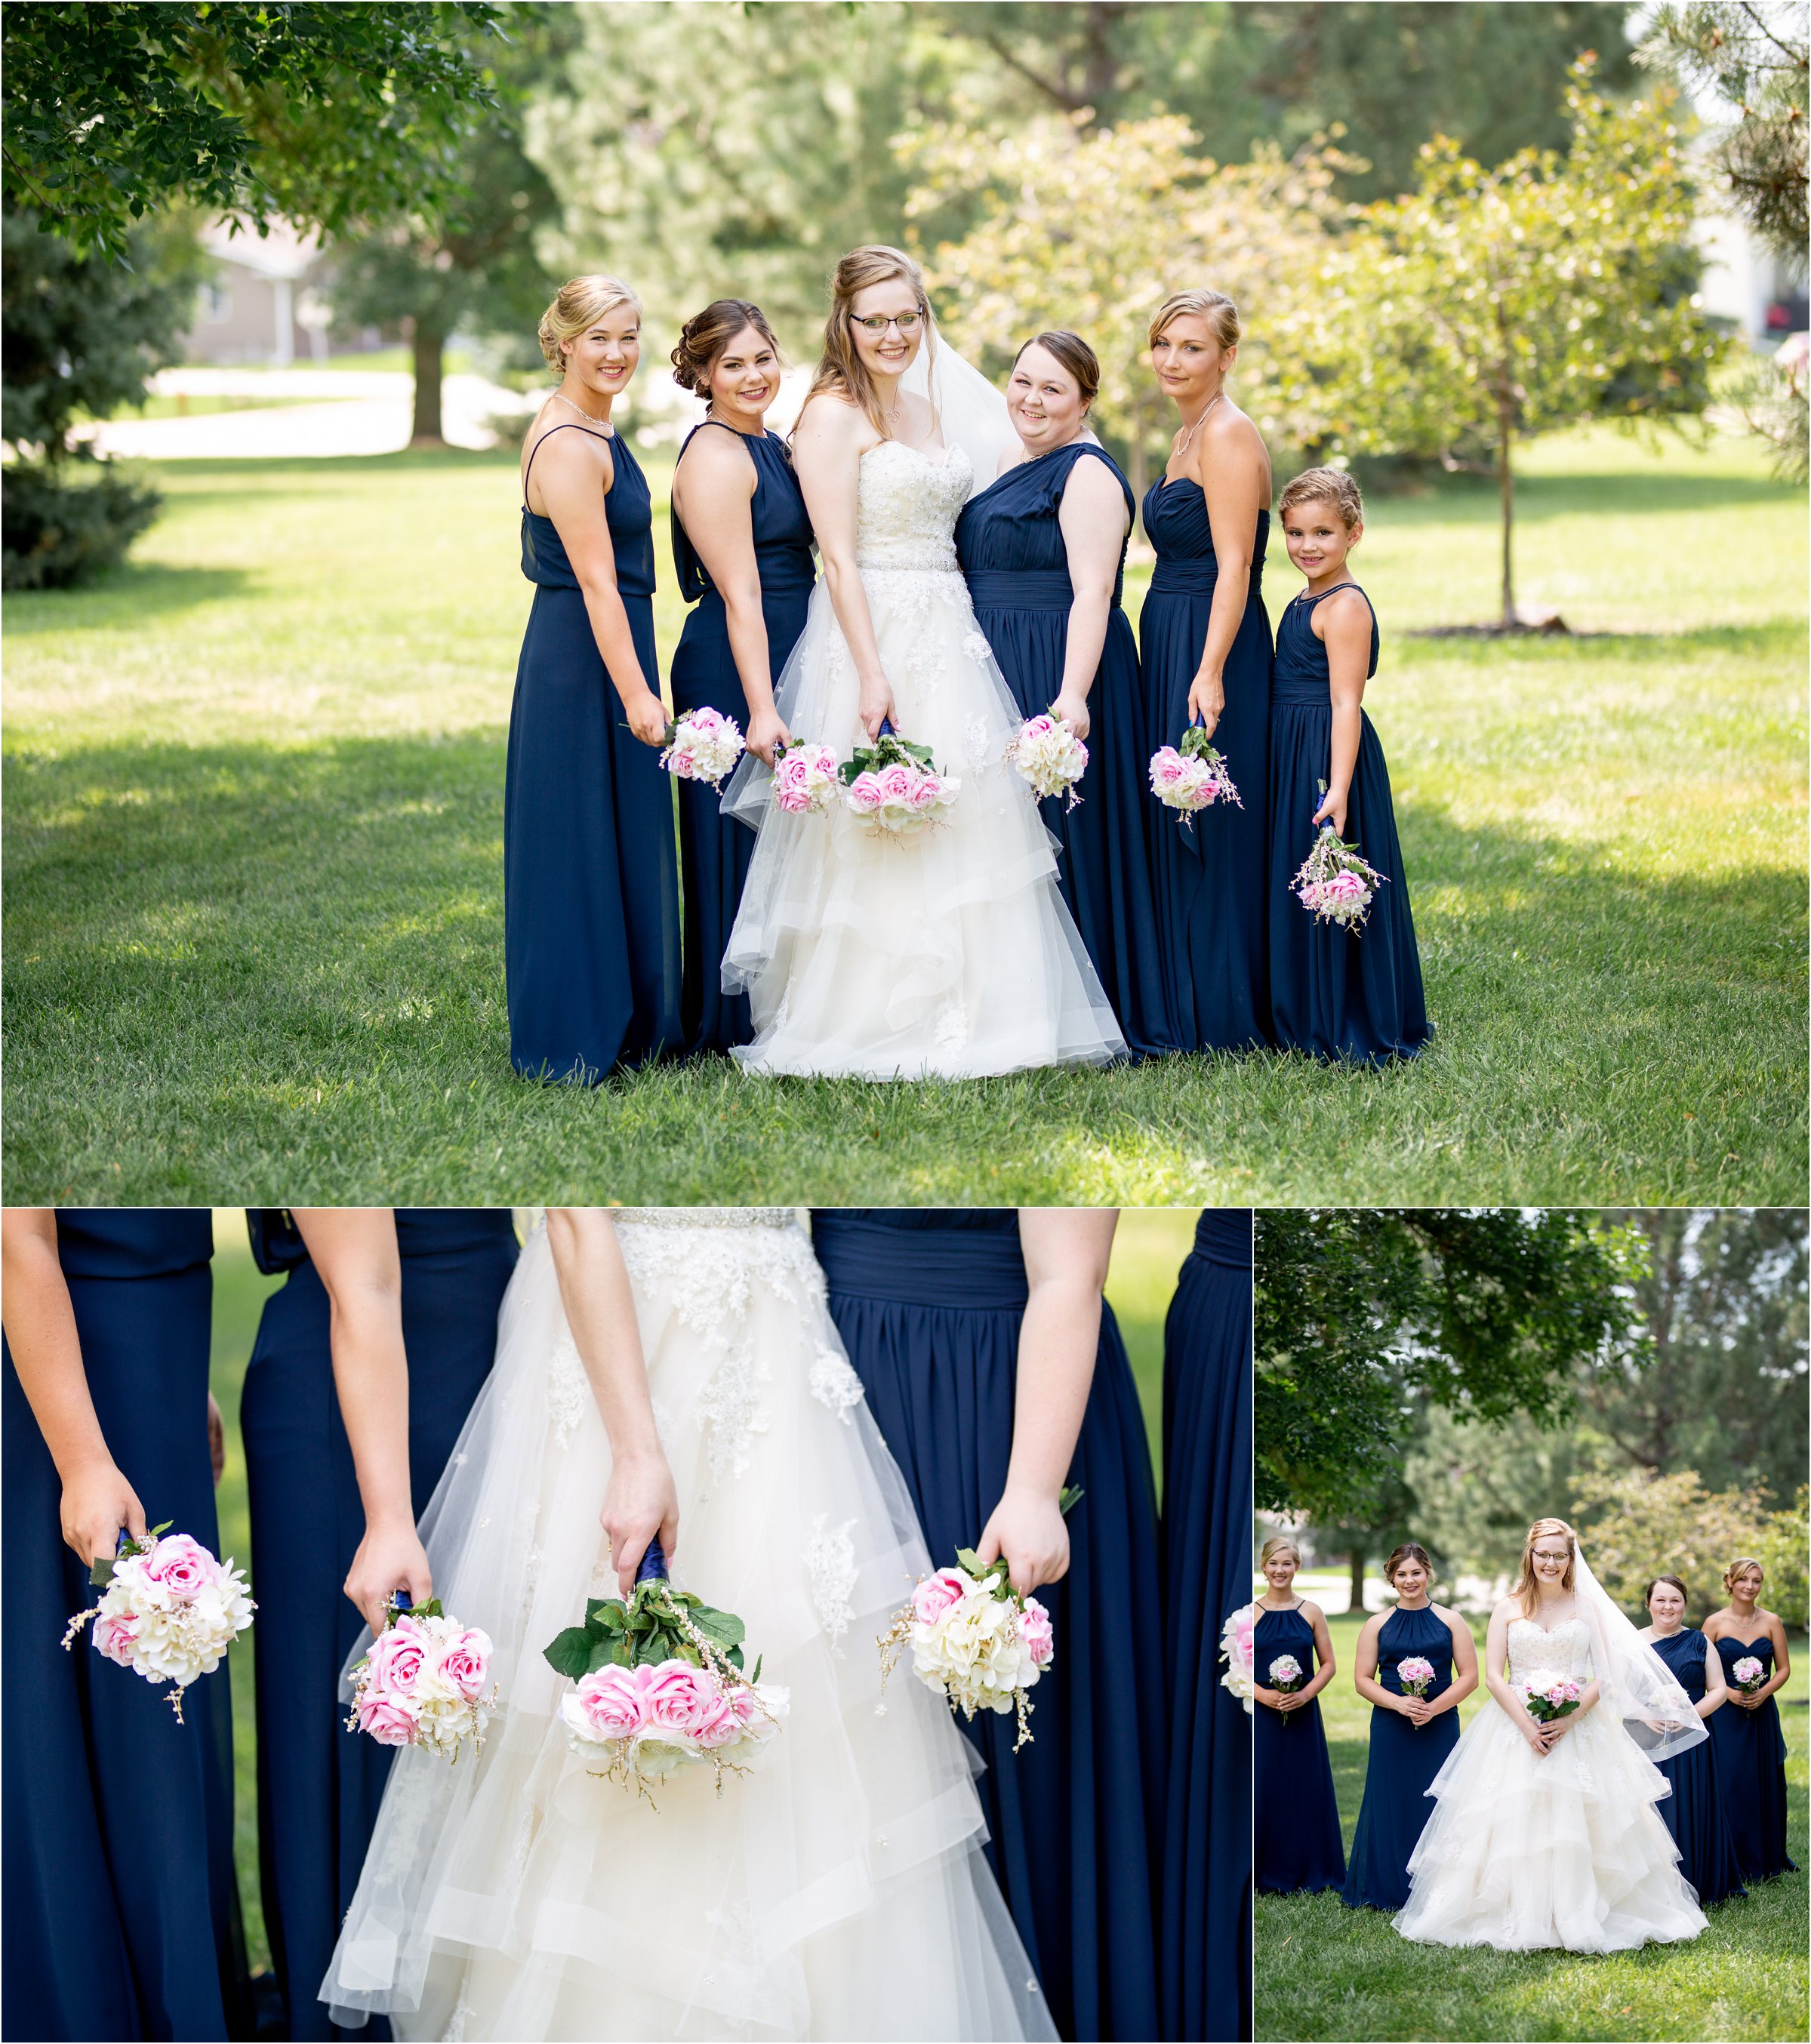 bride poses with her bridesmaids in navy blue dresses with pink flowers before her wedding at holdrege trinity church